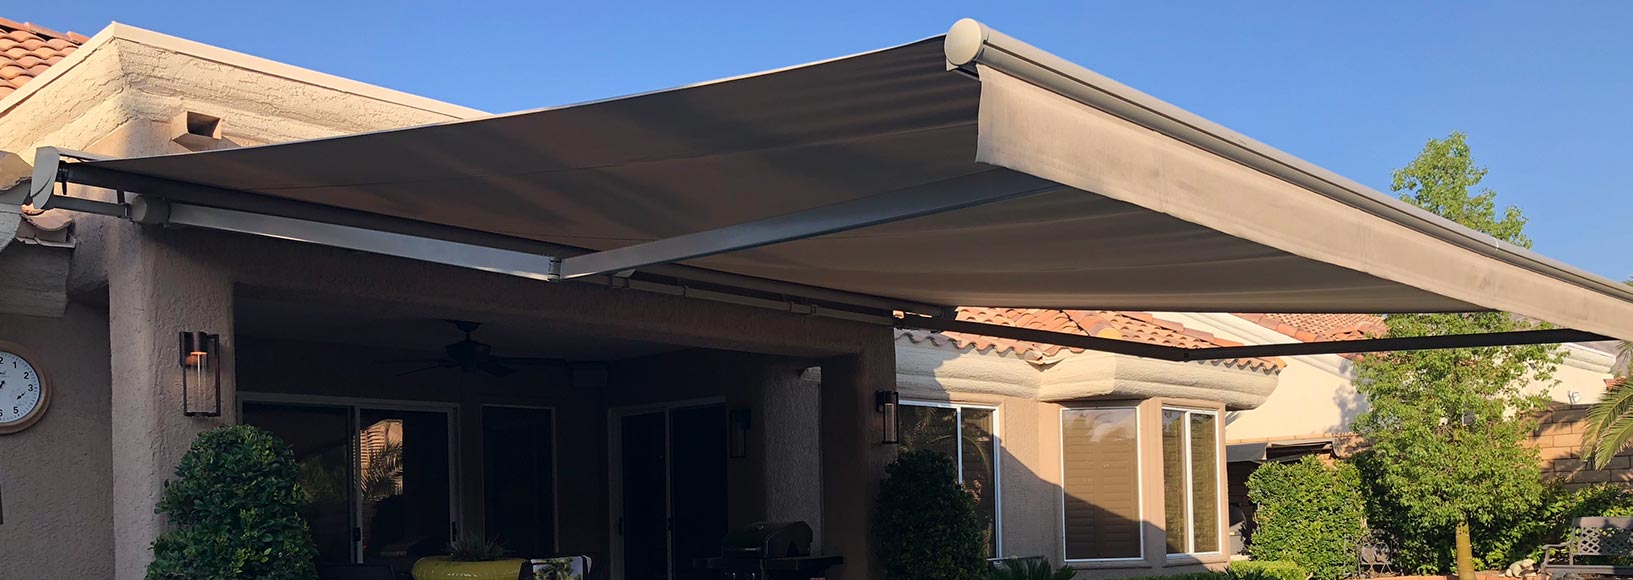 A shady, retractable awning.